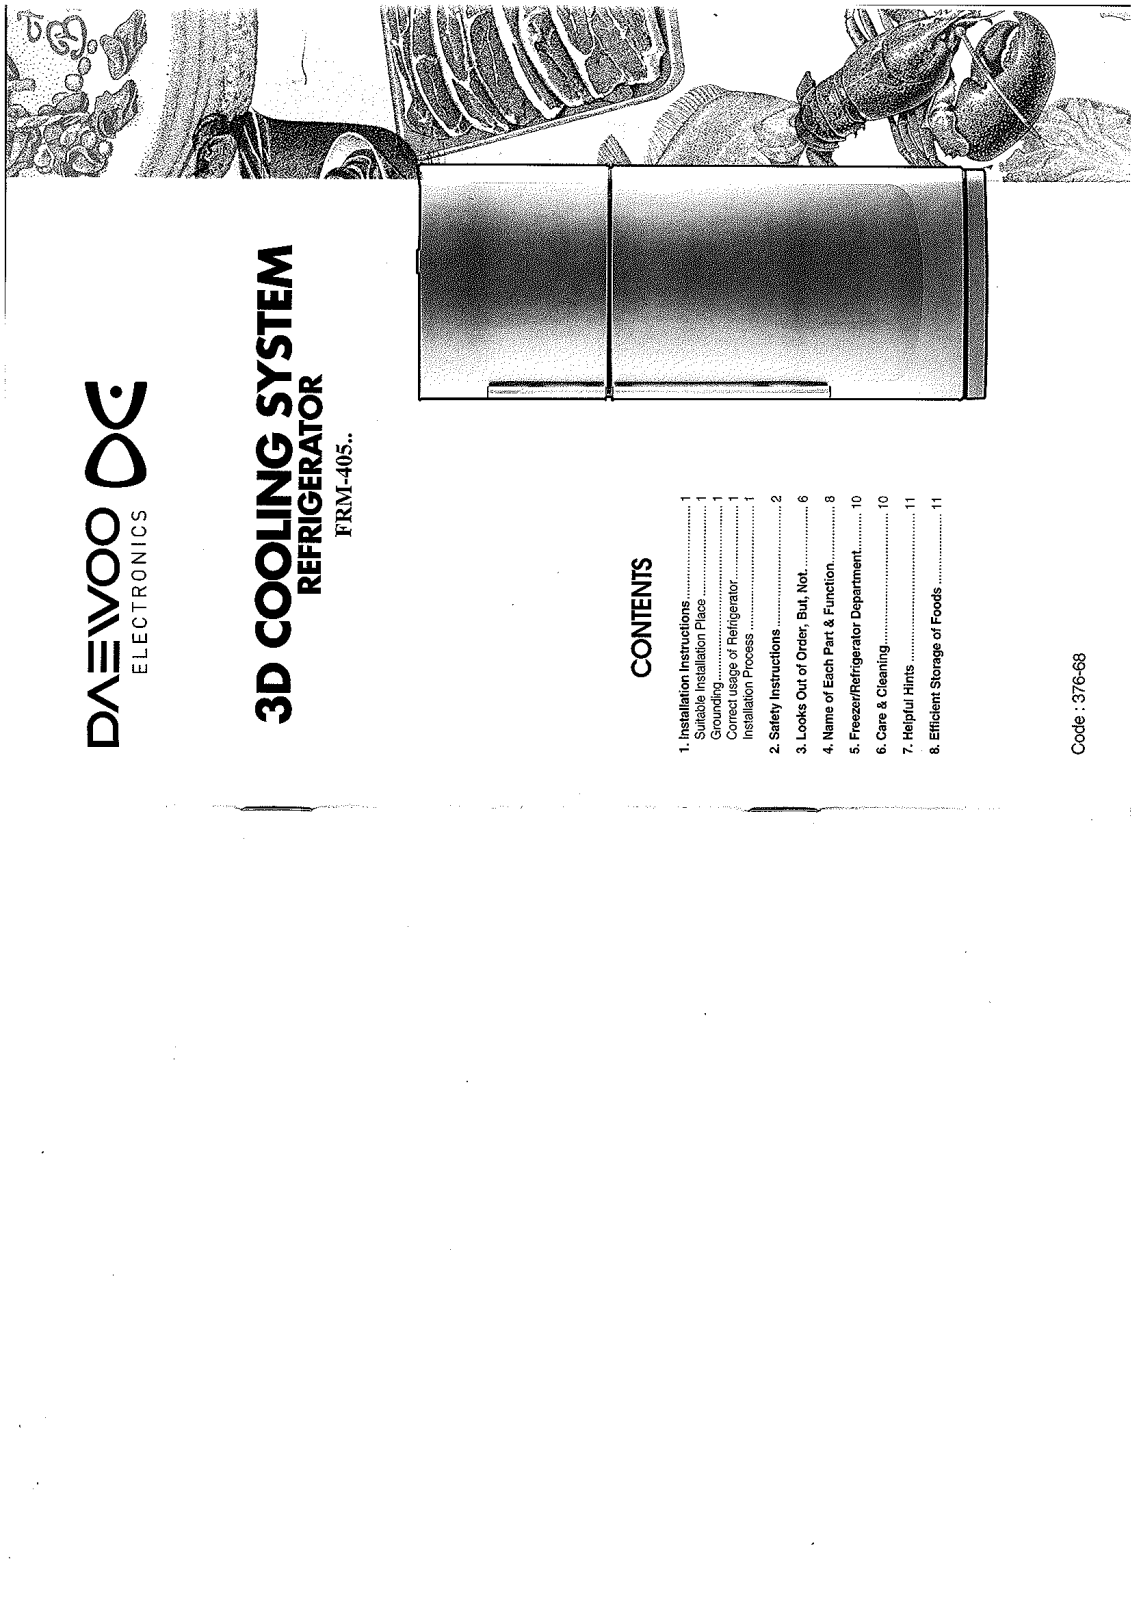 Daewoo FRM-405W, FRM-405S User Manual